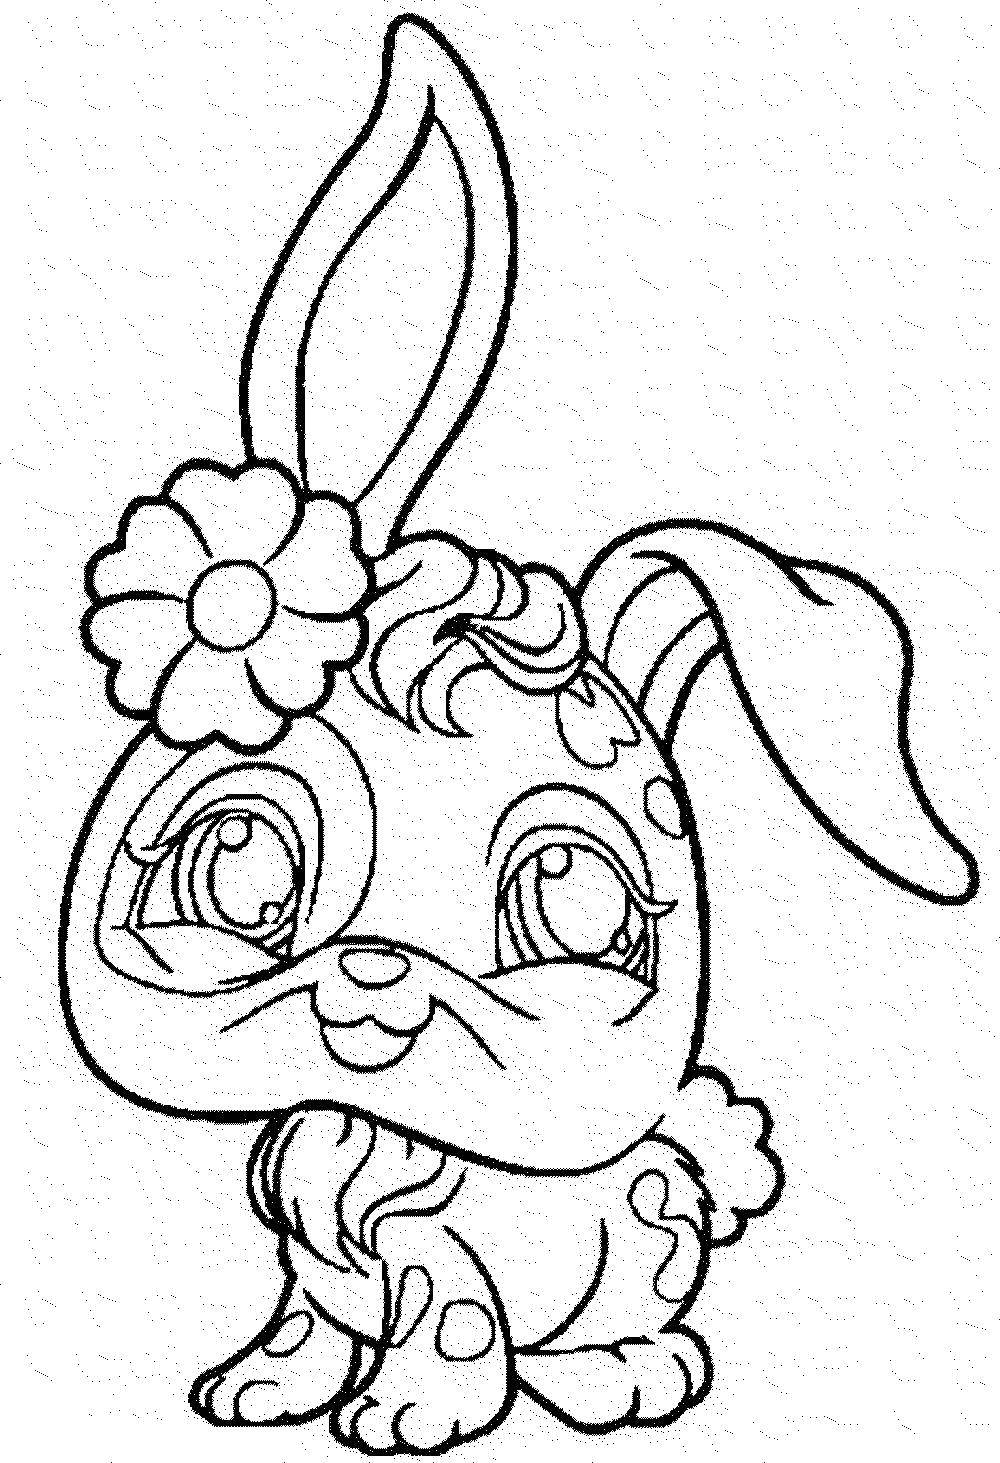 Coloring Rabbit with flower. Category the rabbit. Tags:  rabbit, hare.